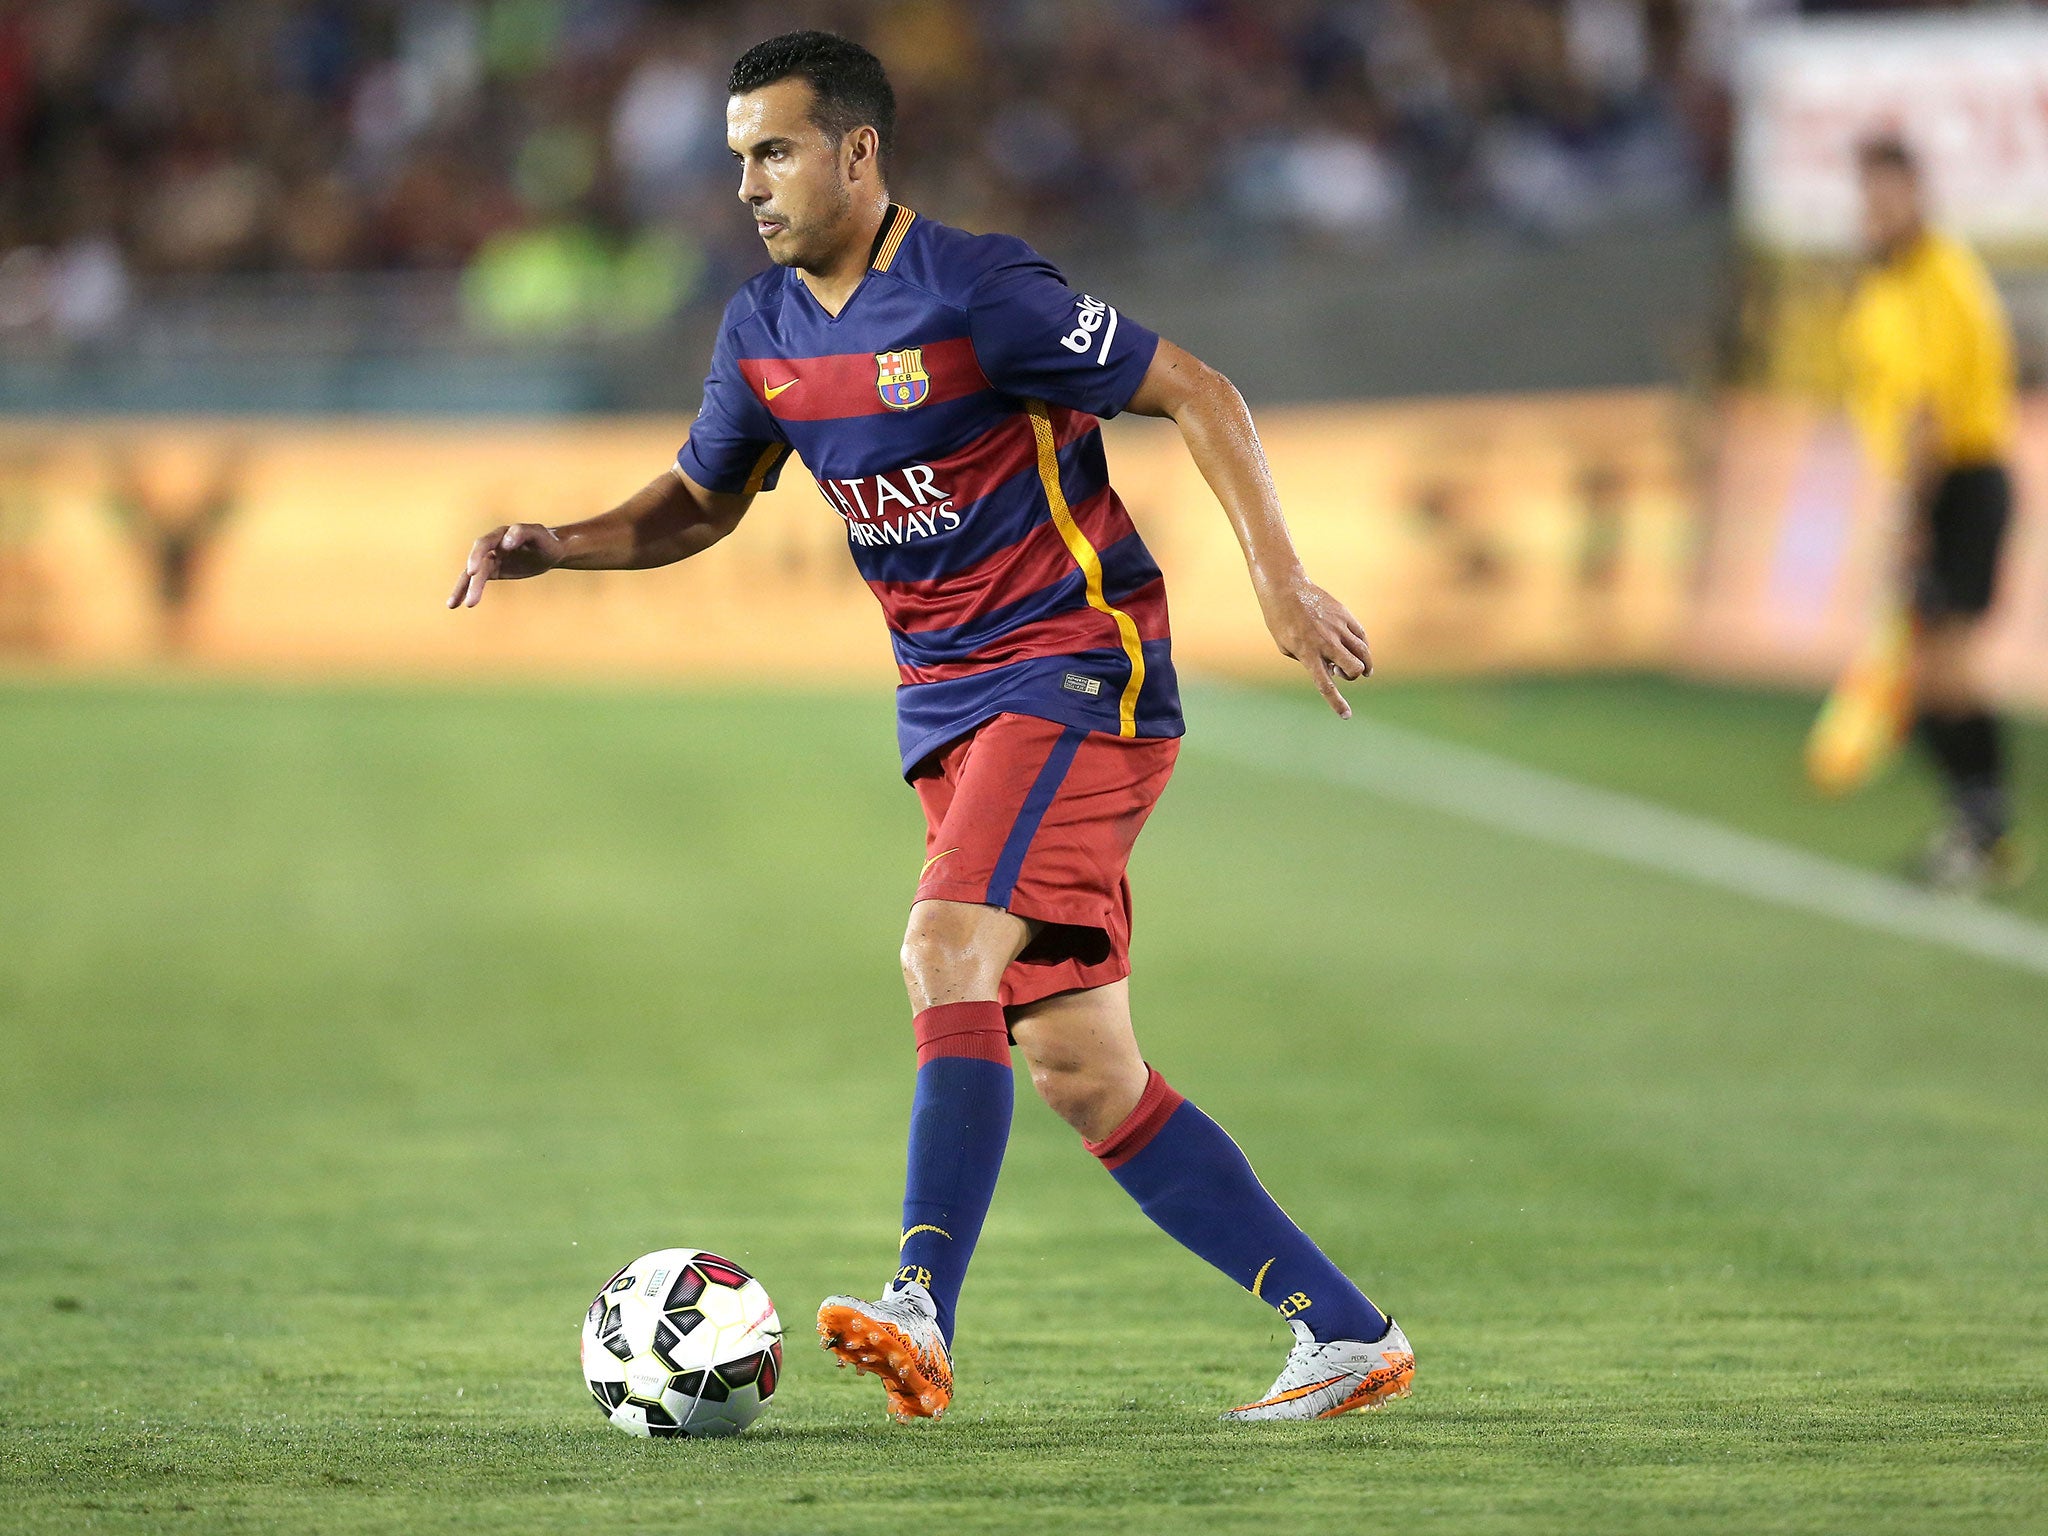 Pedro has been constantly linked with a move to Manchester United